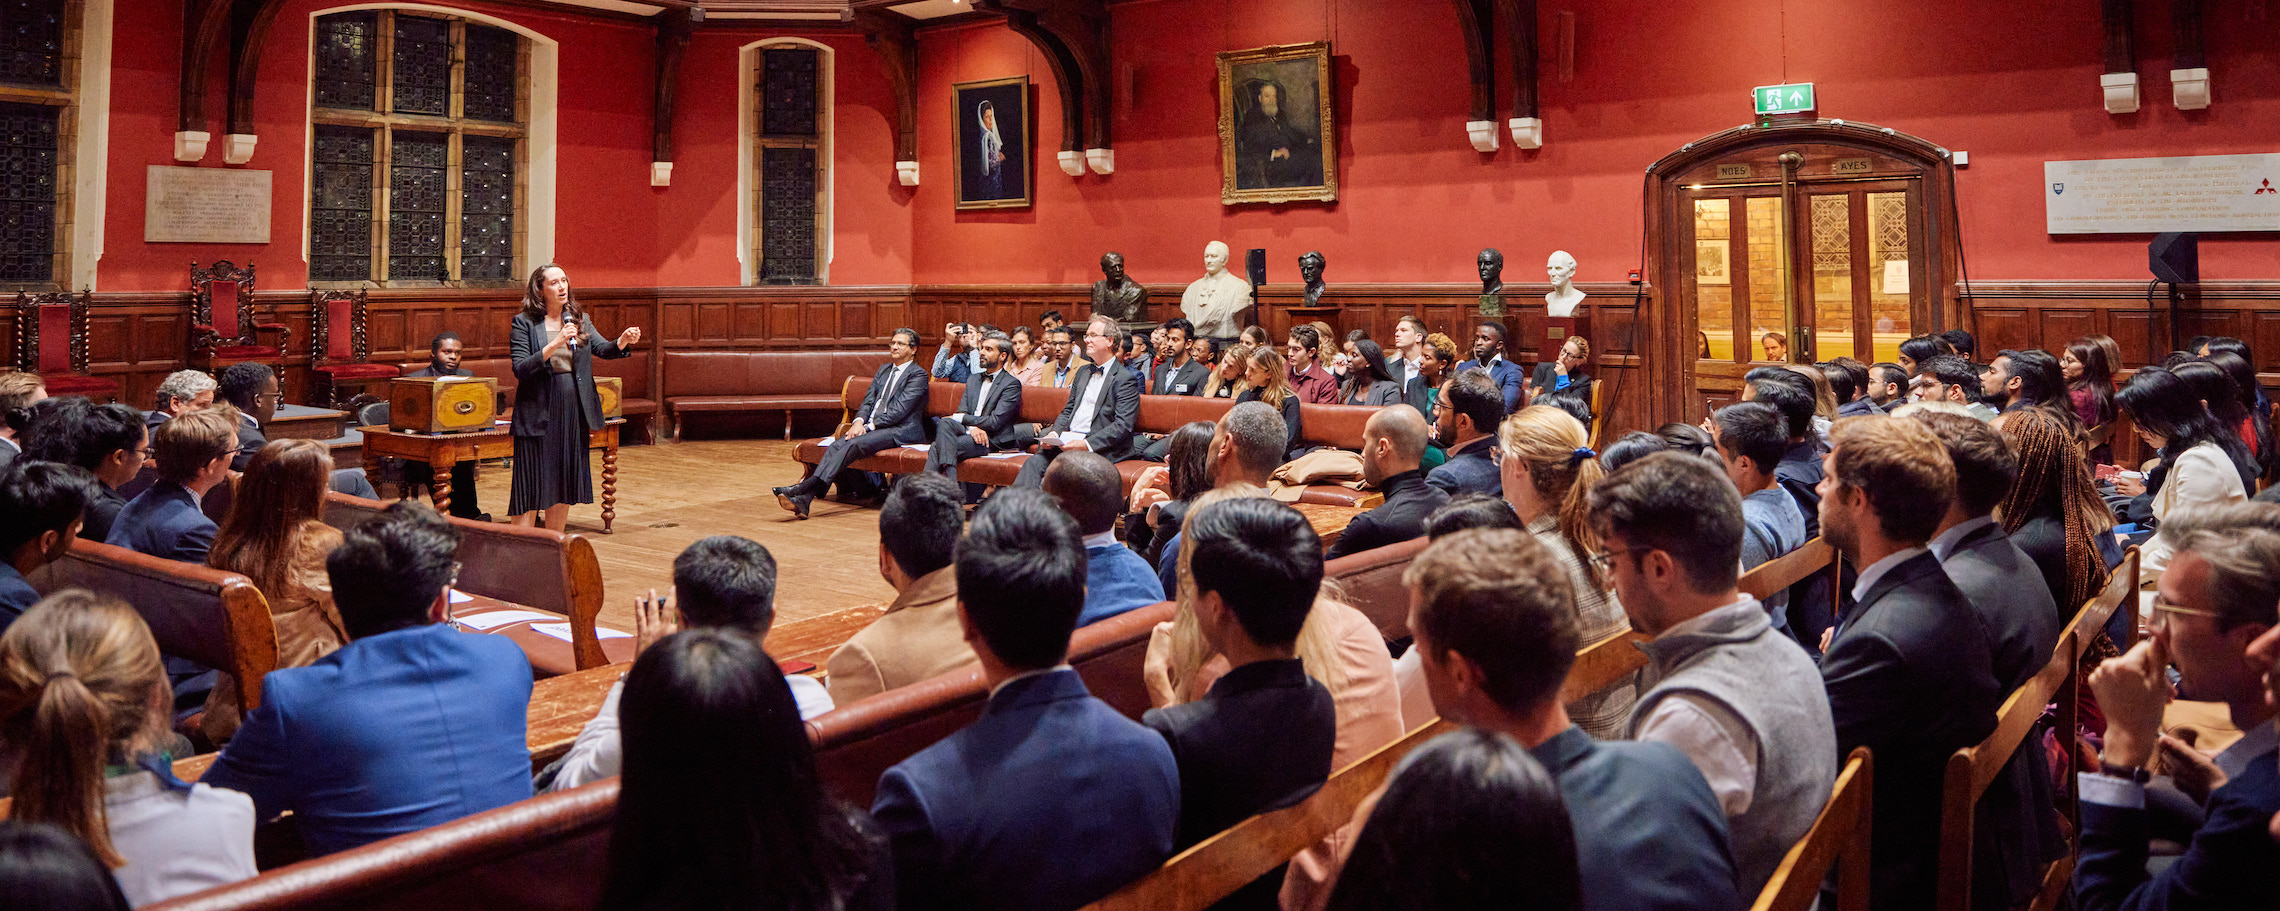 Inside a full Oxford Union debating chamber